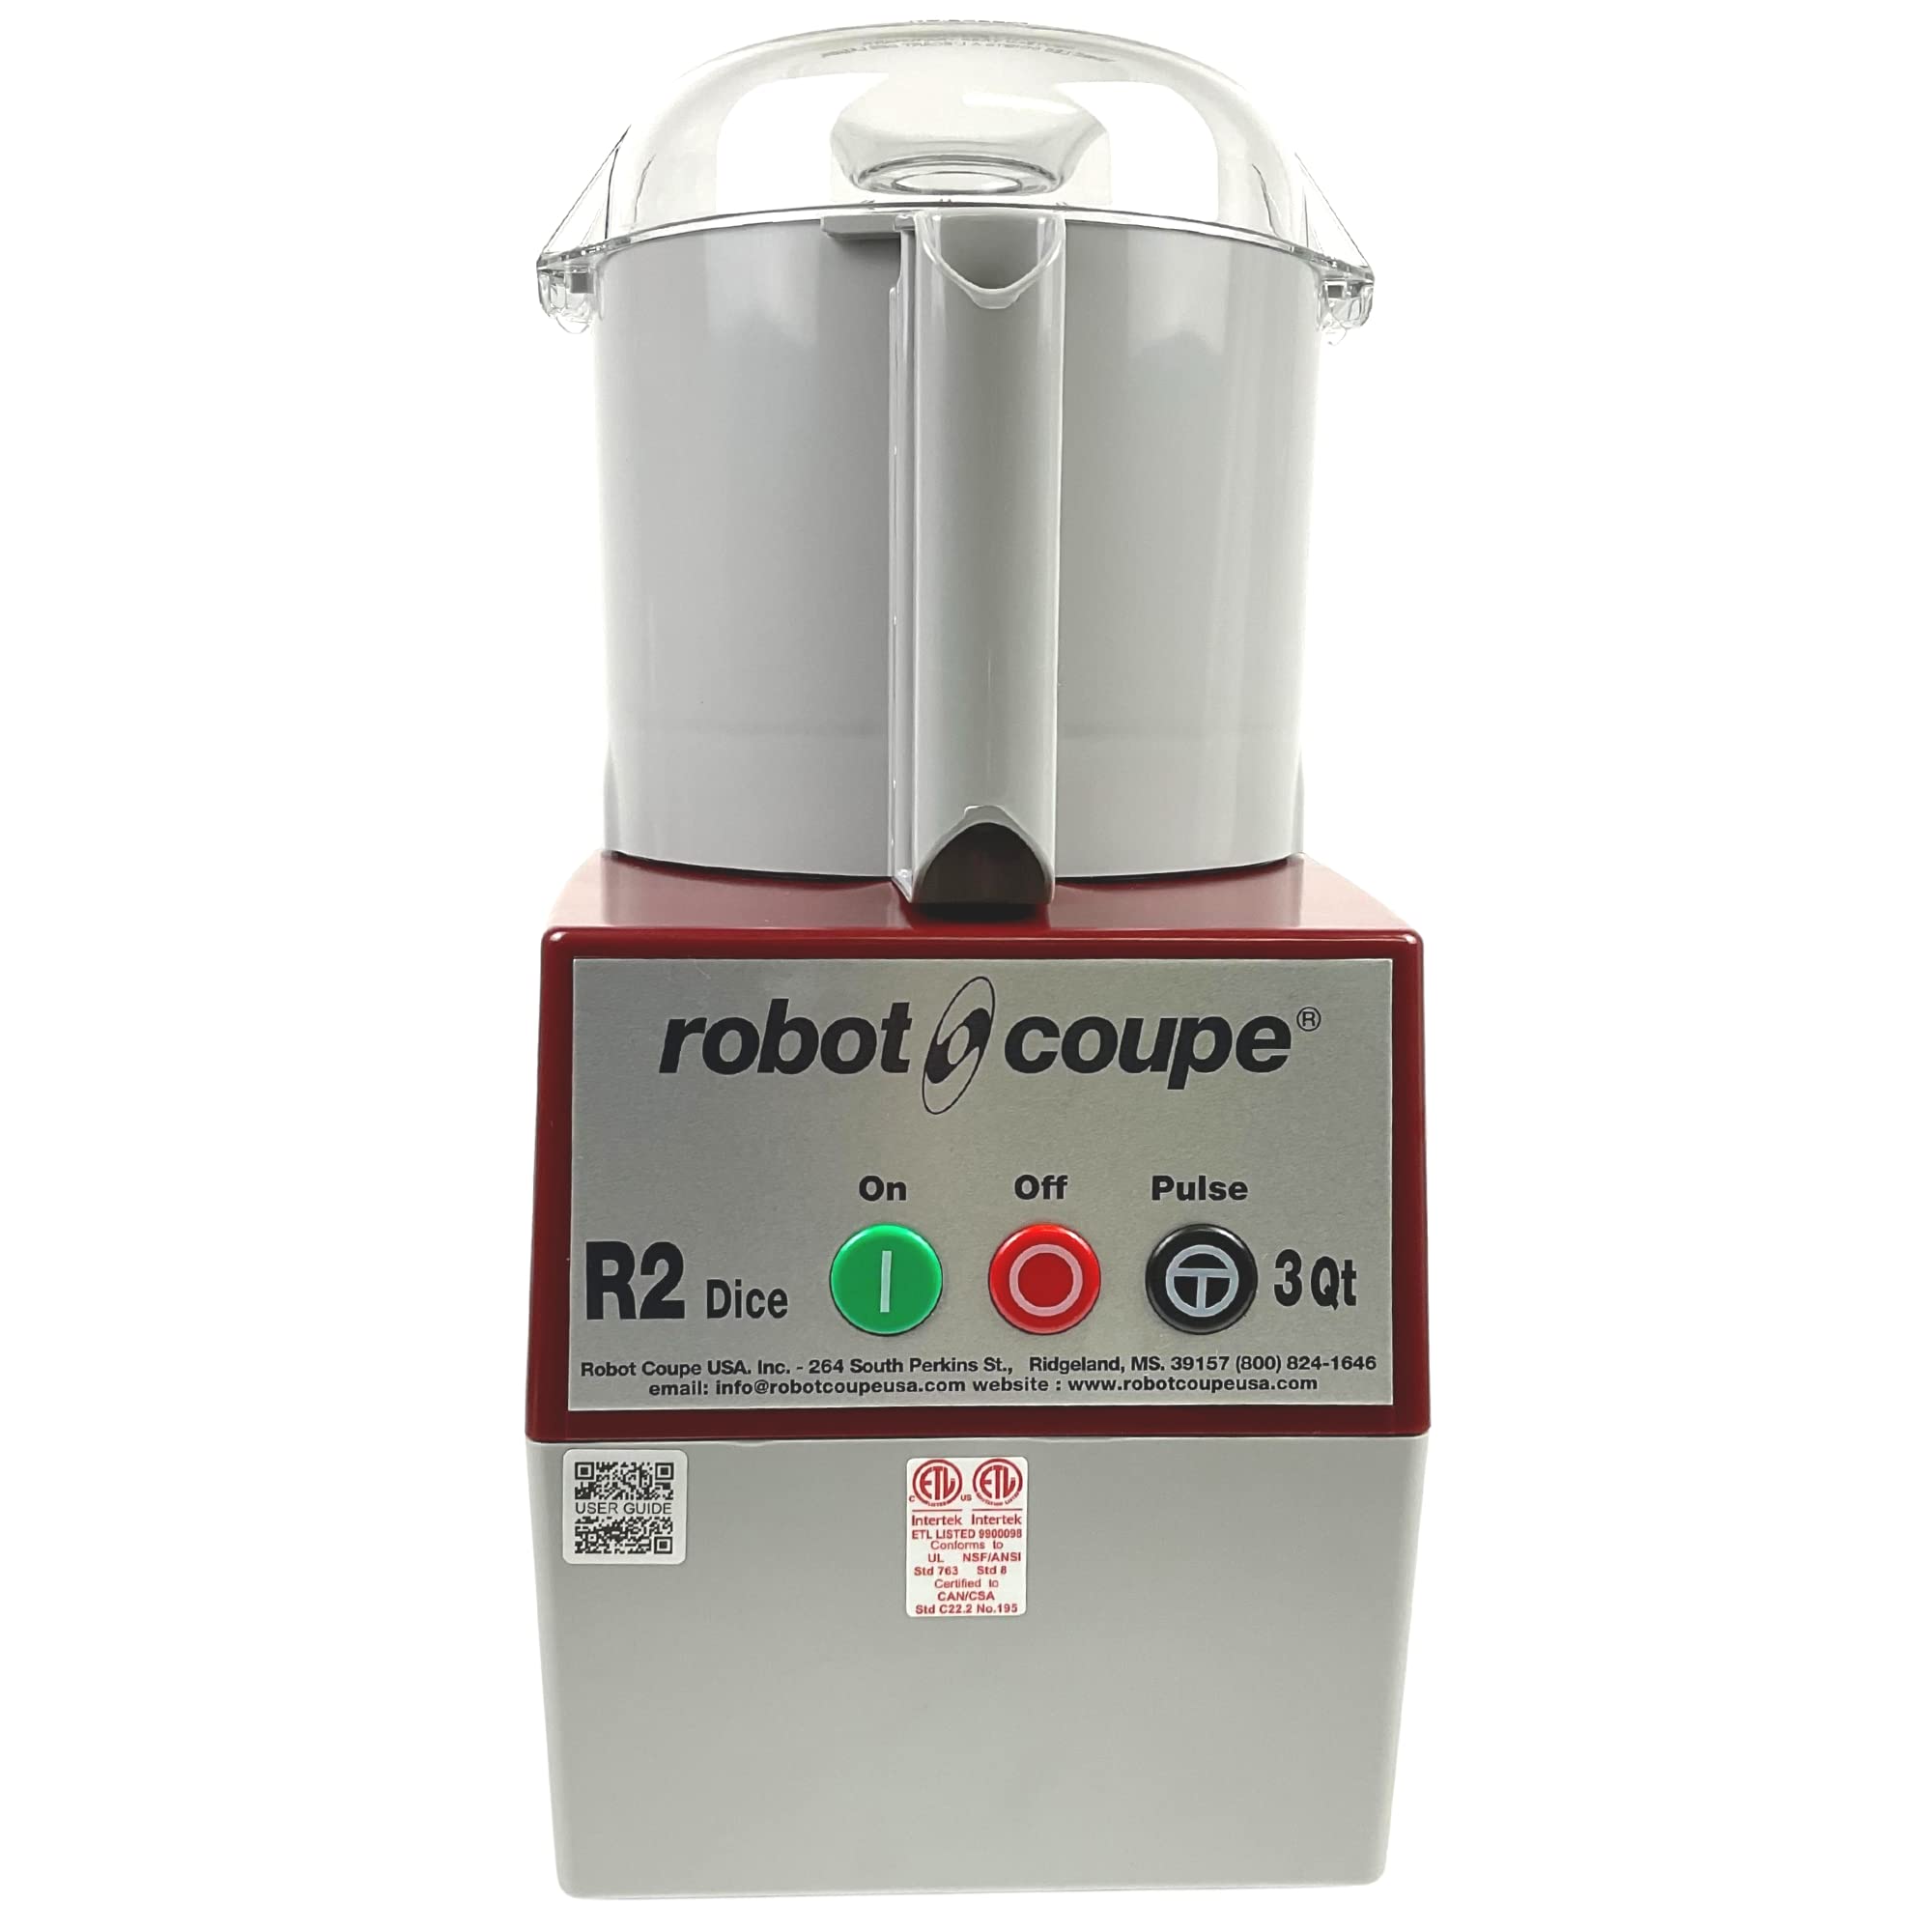 Robot Coupe R2 Dice Continuous Feed Combination Food Processor Dicer with 3-Quart Polycarbonate Bowl, Gray, 120-Volts & 101866 Discharge Plate